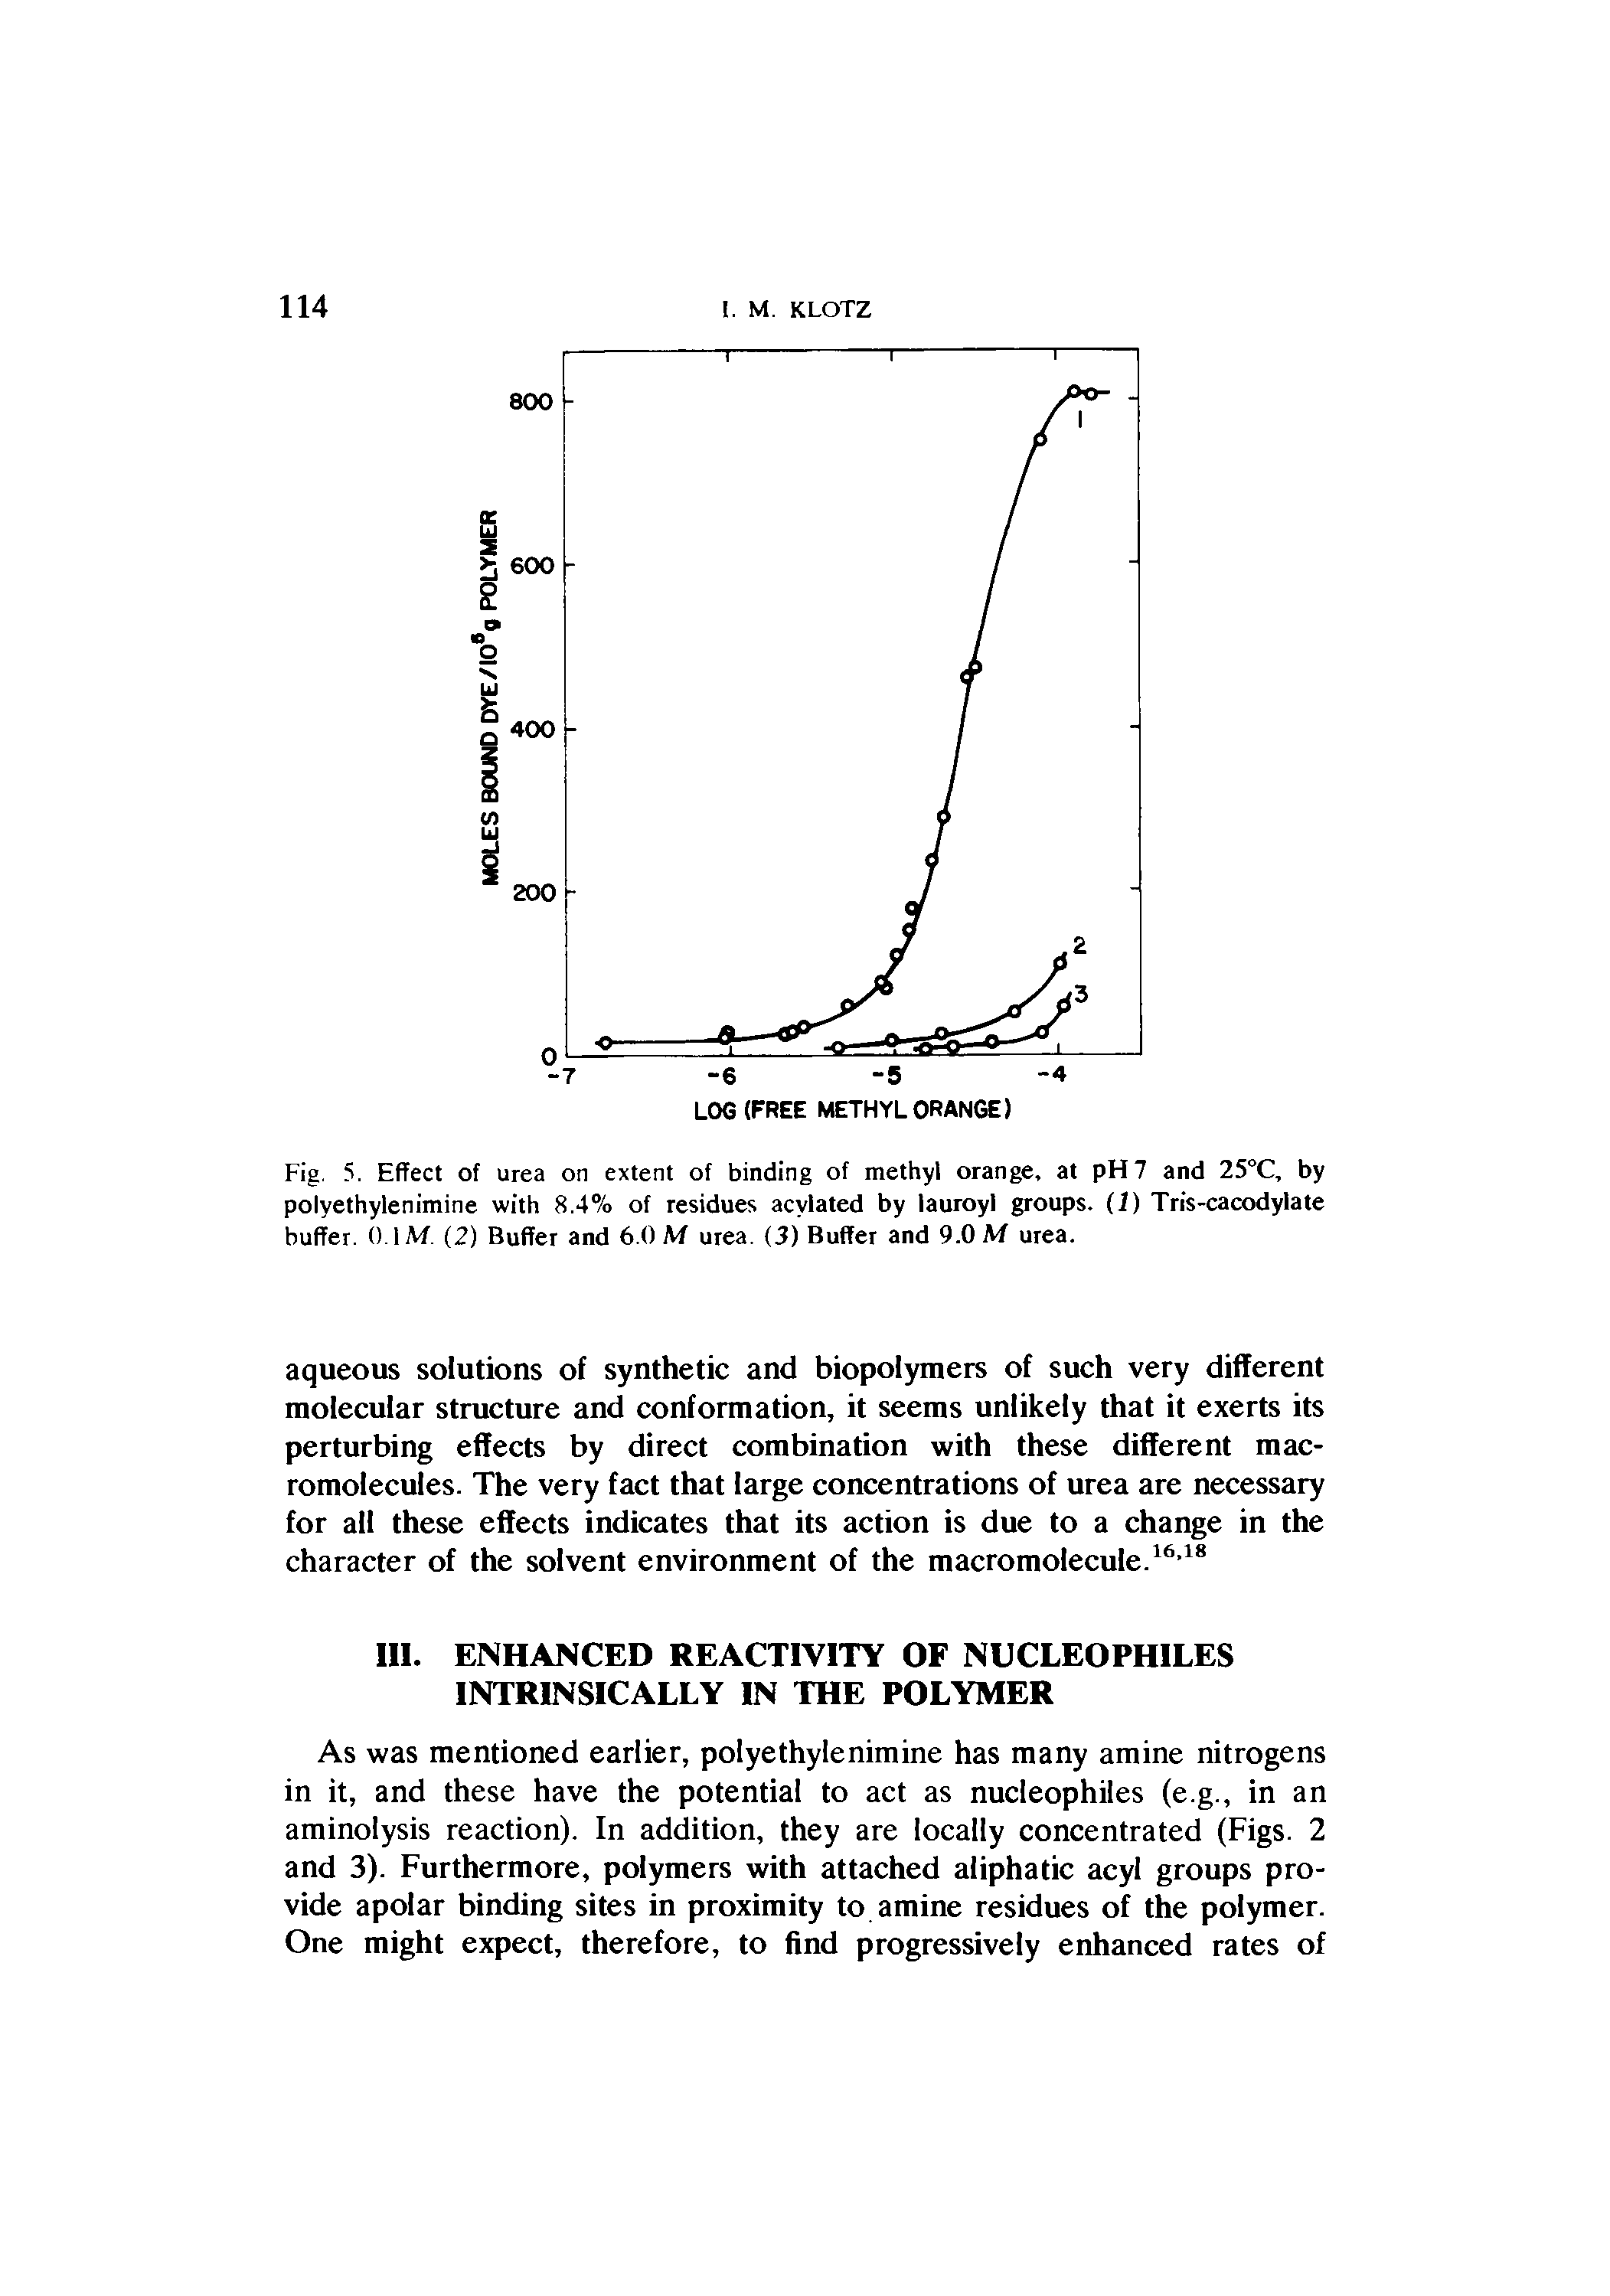 Fig. 5. Effect of urea on extent of binding of methyl orange, at pH 7 and 25°C, by polyethylenimine with 8.4% of residues acvlated by lauroyl groups. (1) Tris-cacodylate buffer. 0.1 M. (2) Buffer and 6.0 M urea. (3) Buffer and 9.0 M urea.